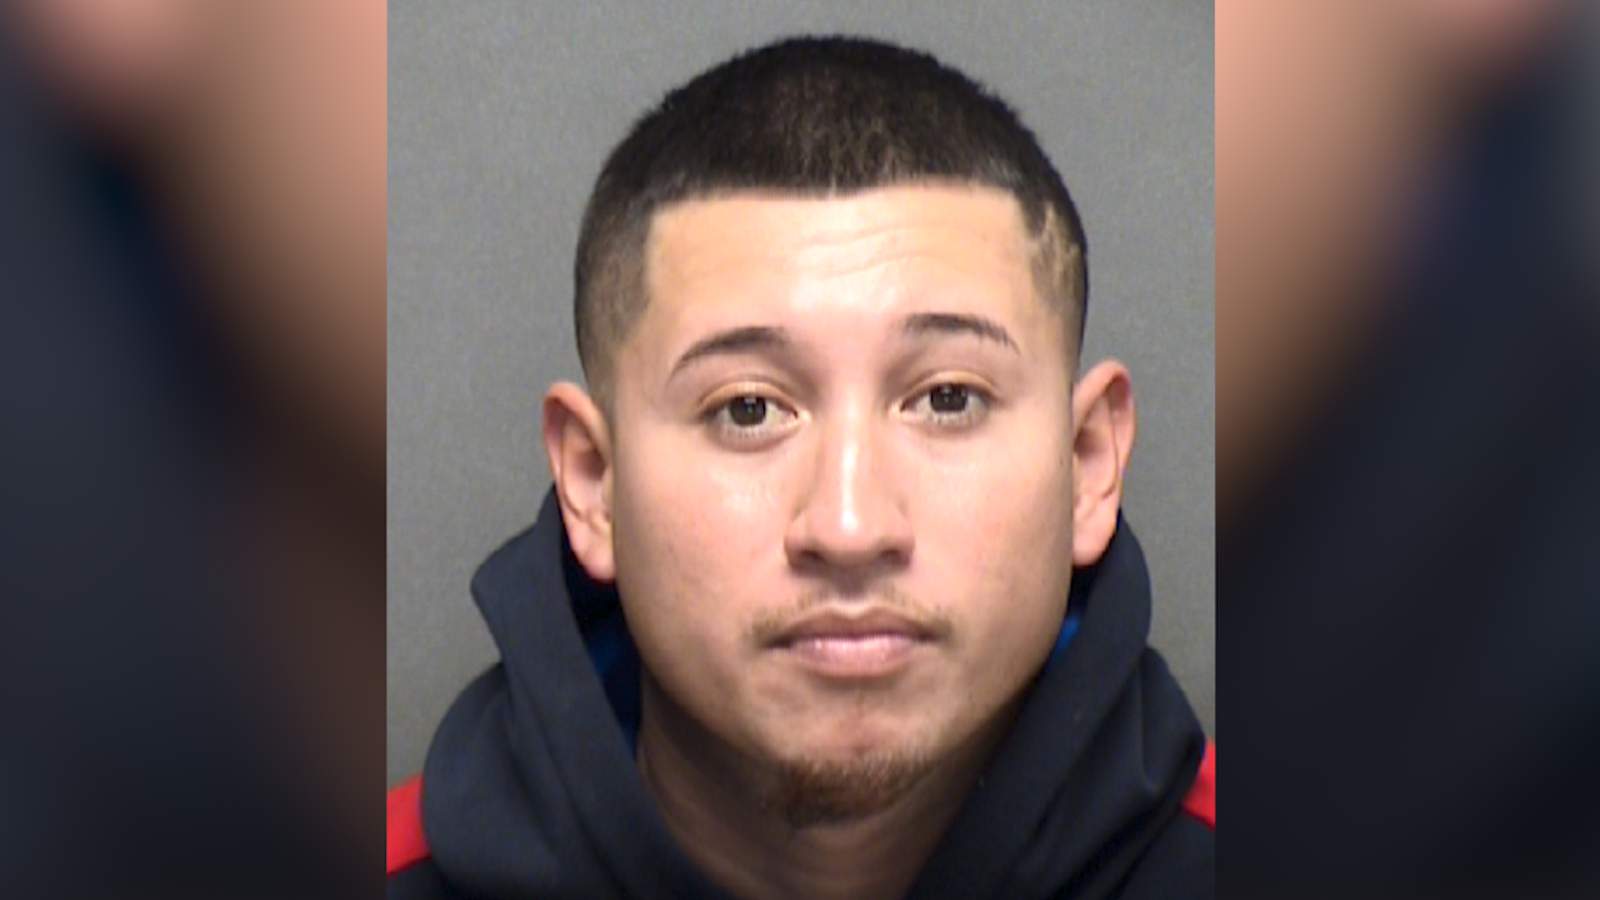 Tip leads to arrest of driver allegedly involved in deadly hit-and-run crash